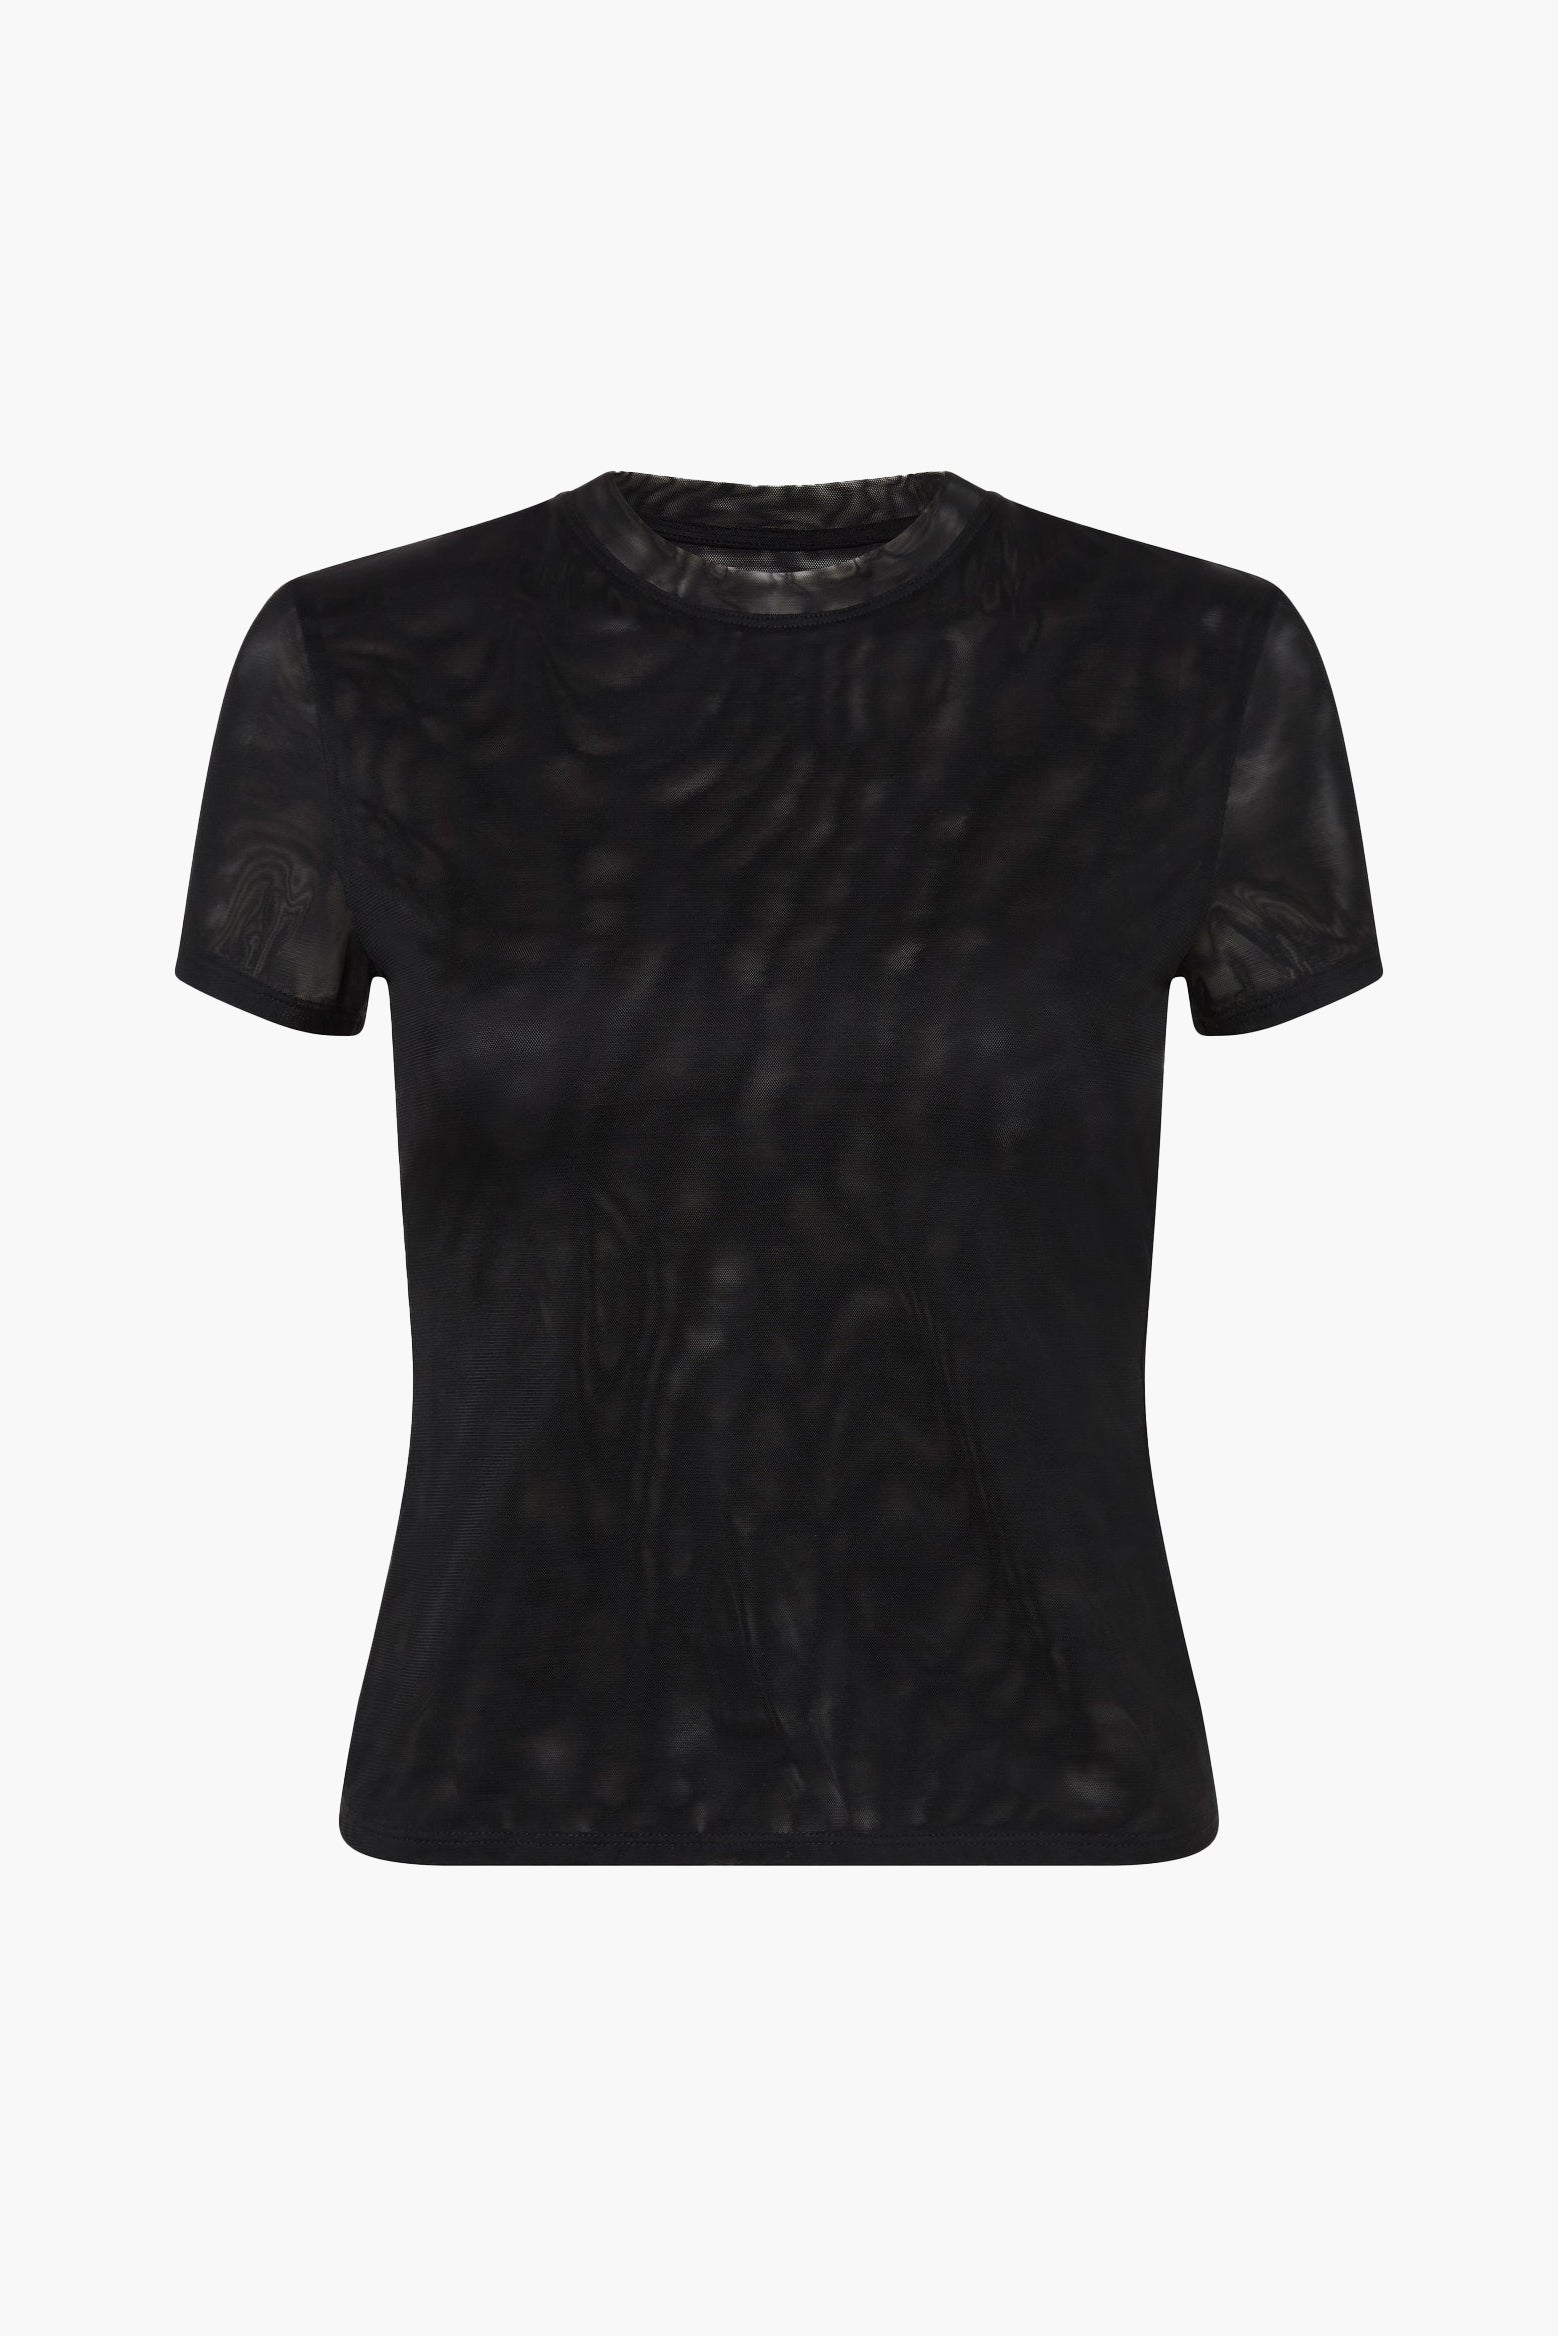 SIR Jacques Mesh Fitted Tee in Black available at The New Trend Australia. 